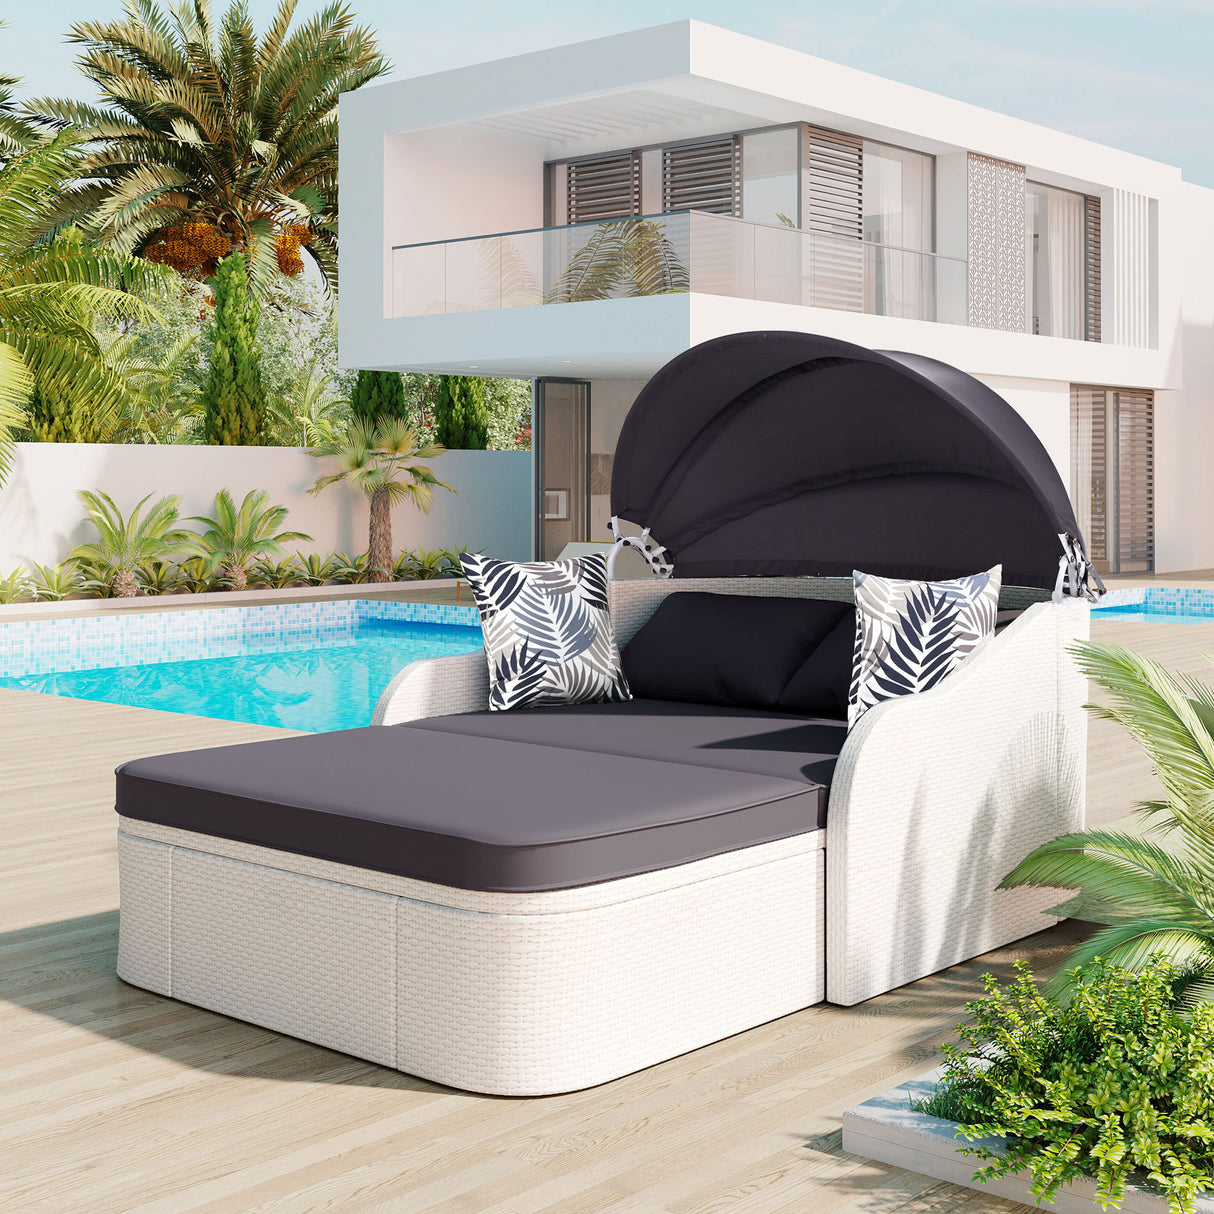 GO 79.9" Outdoor Sunbed with Adjustable Canopy, Double lounge, PE Rattan Daybed, White Wicker, Gray Cushion